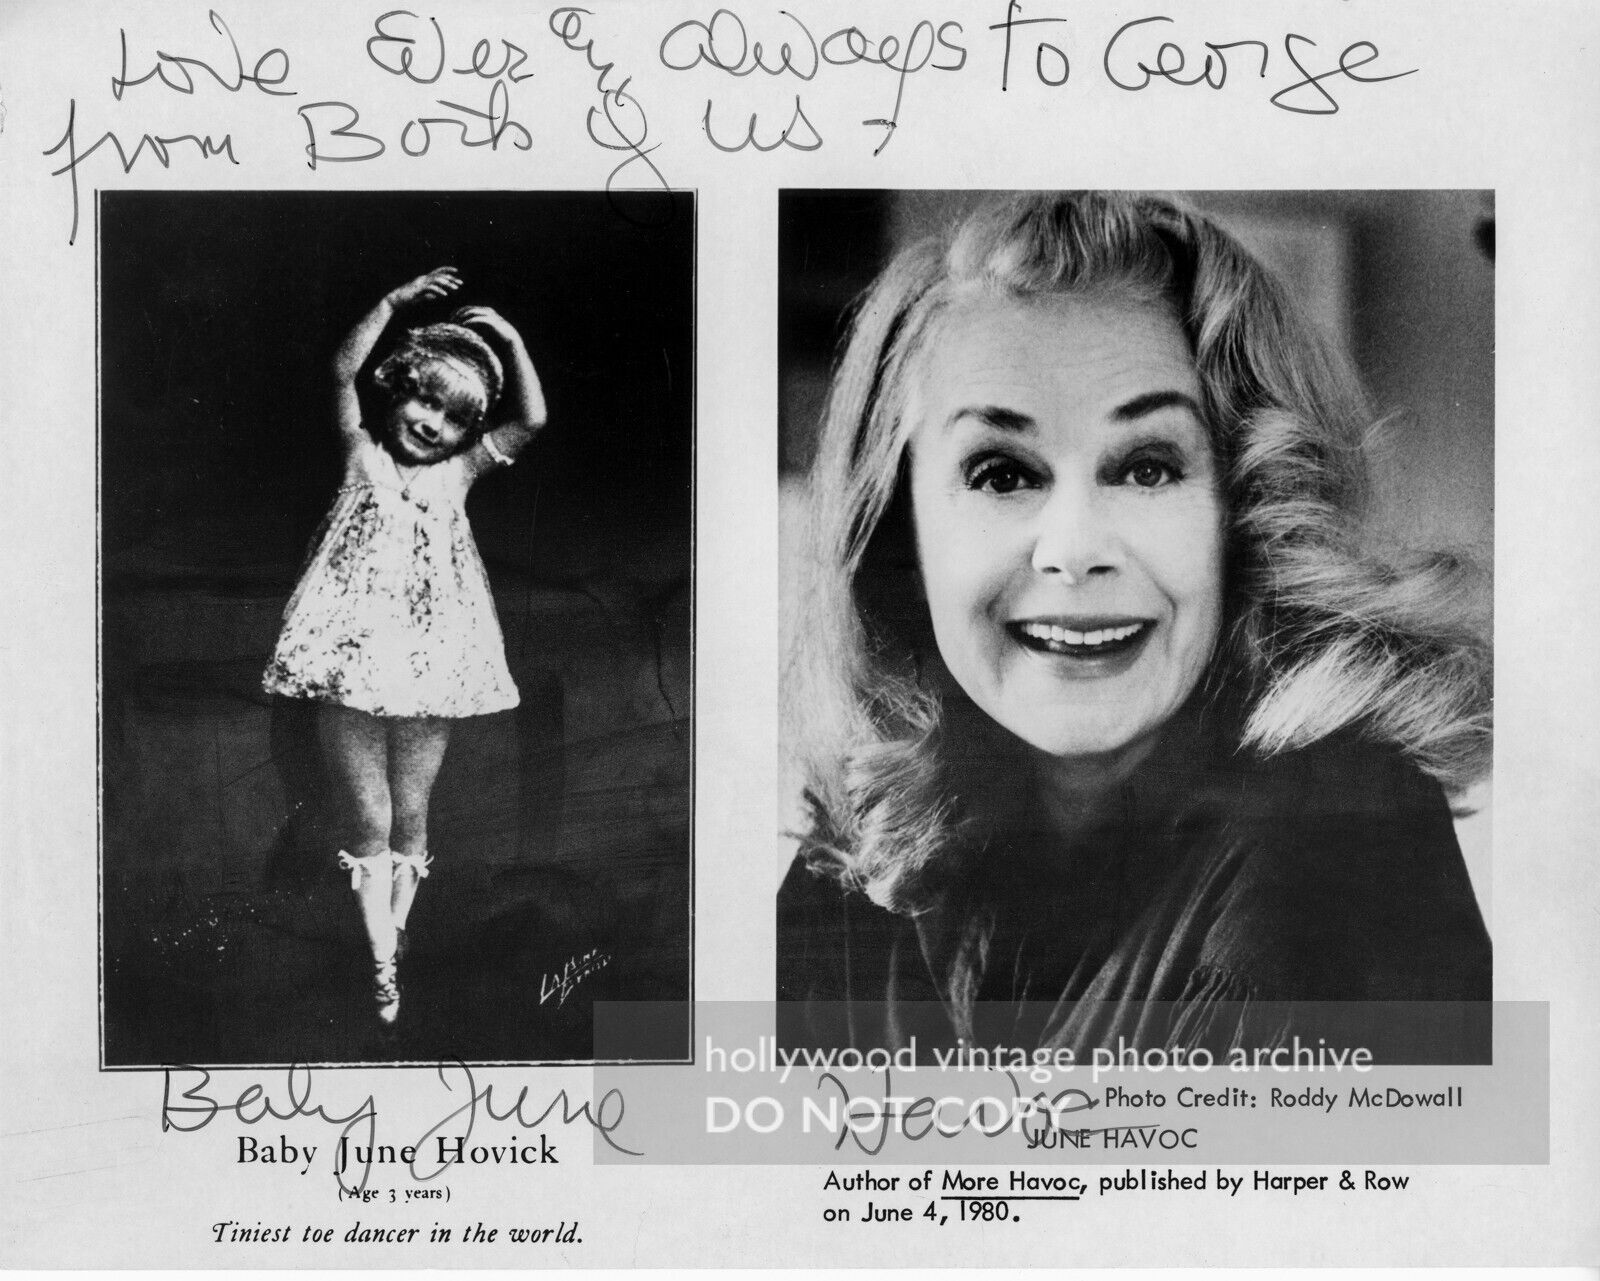 June Havoc quirky \'double\' SIGNED photograph \'from both of us\' Baby June Hovick